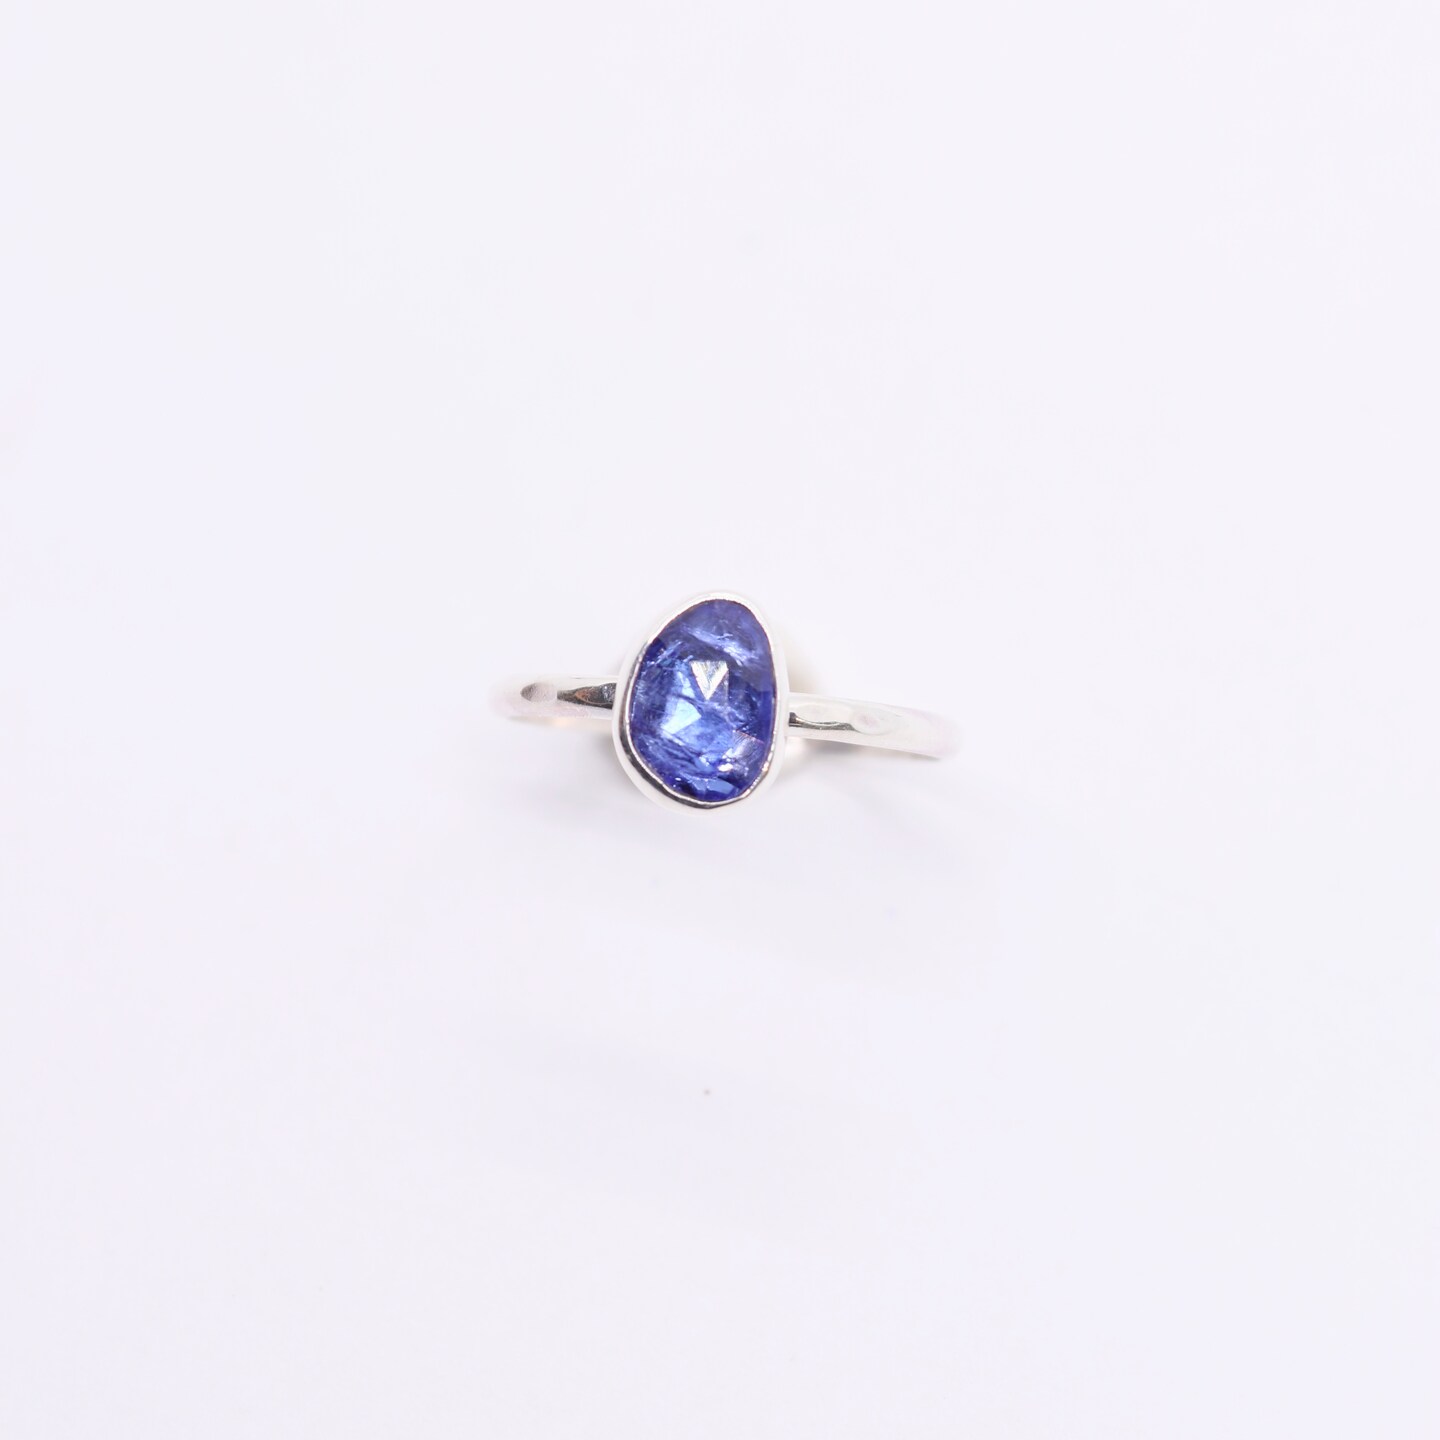 Tanzanite Gemstone Boho Ring in Sterling Silver, Bohemian Stone Stacking Ring, One of a Kind and Unique Bespoke Jewelry, Small Batch Ar 309102082004959232